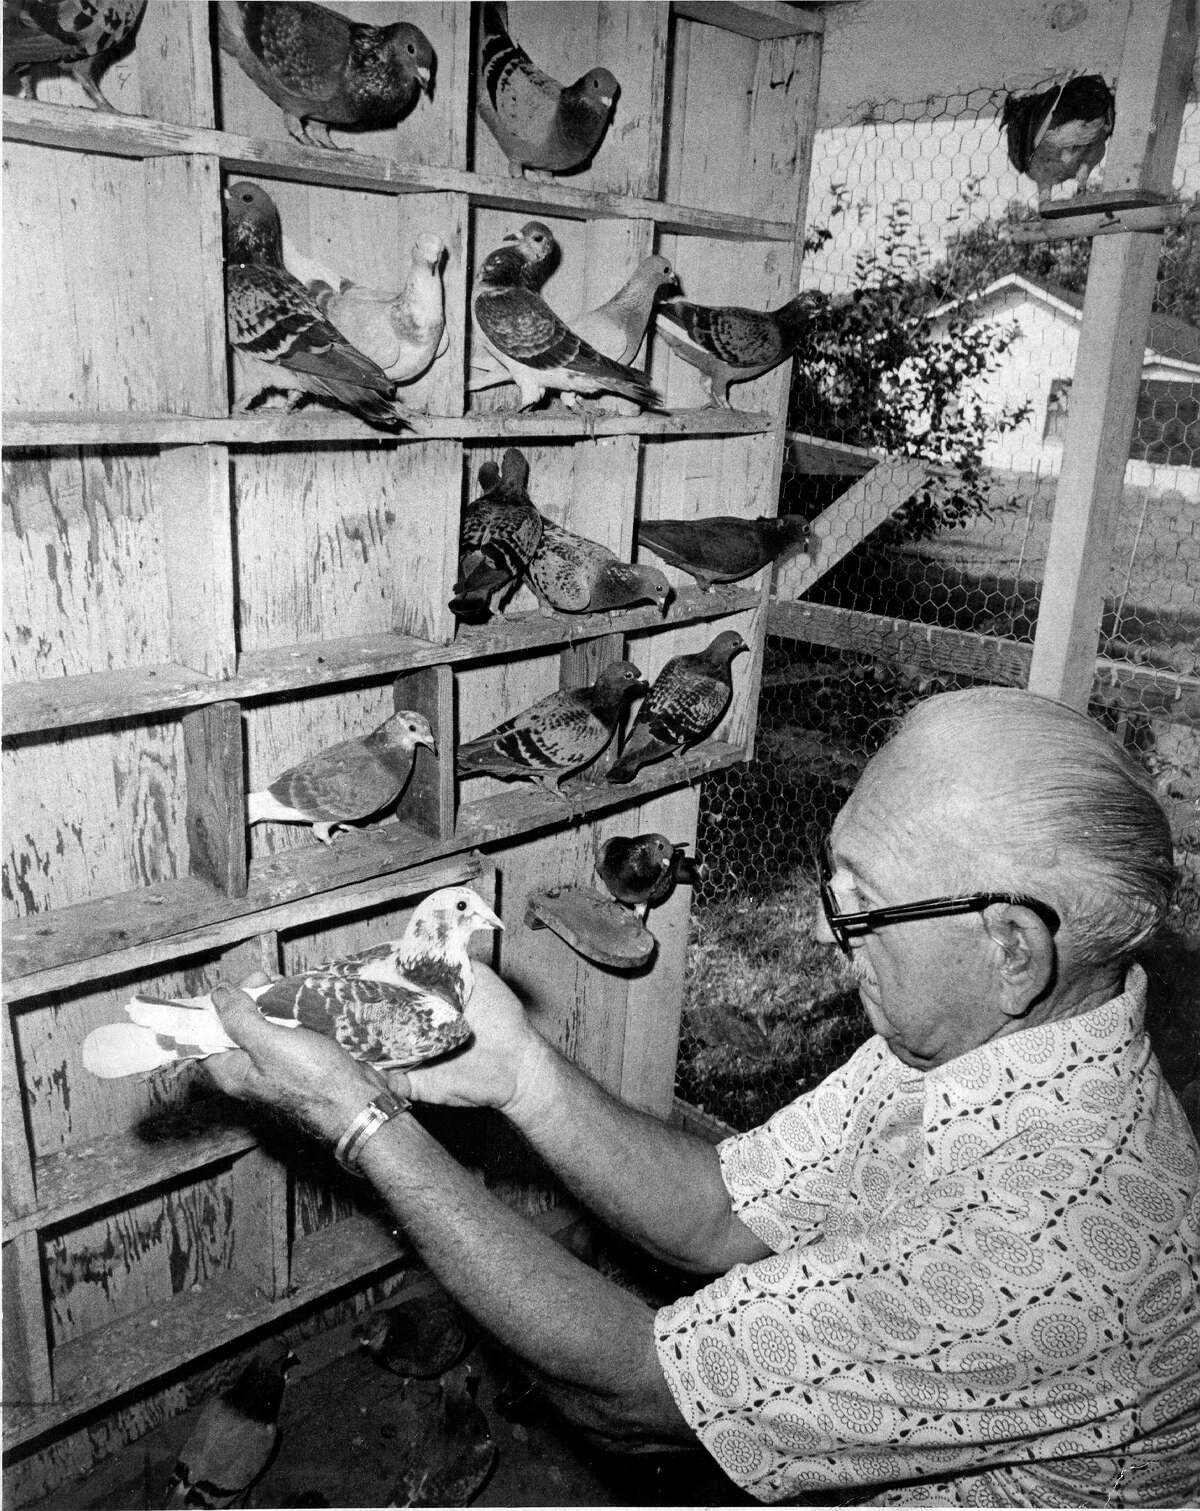 Bill Goodspeed, former Express-News photographer, holds one of the pigeons that were used to send film from football games to be processed at the newspaper office.